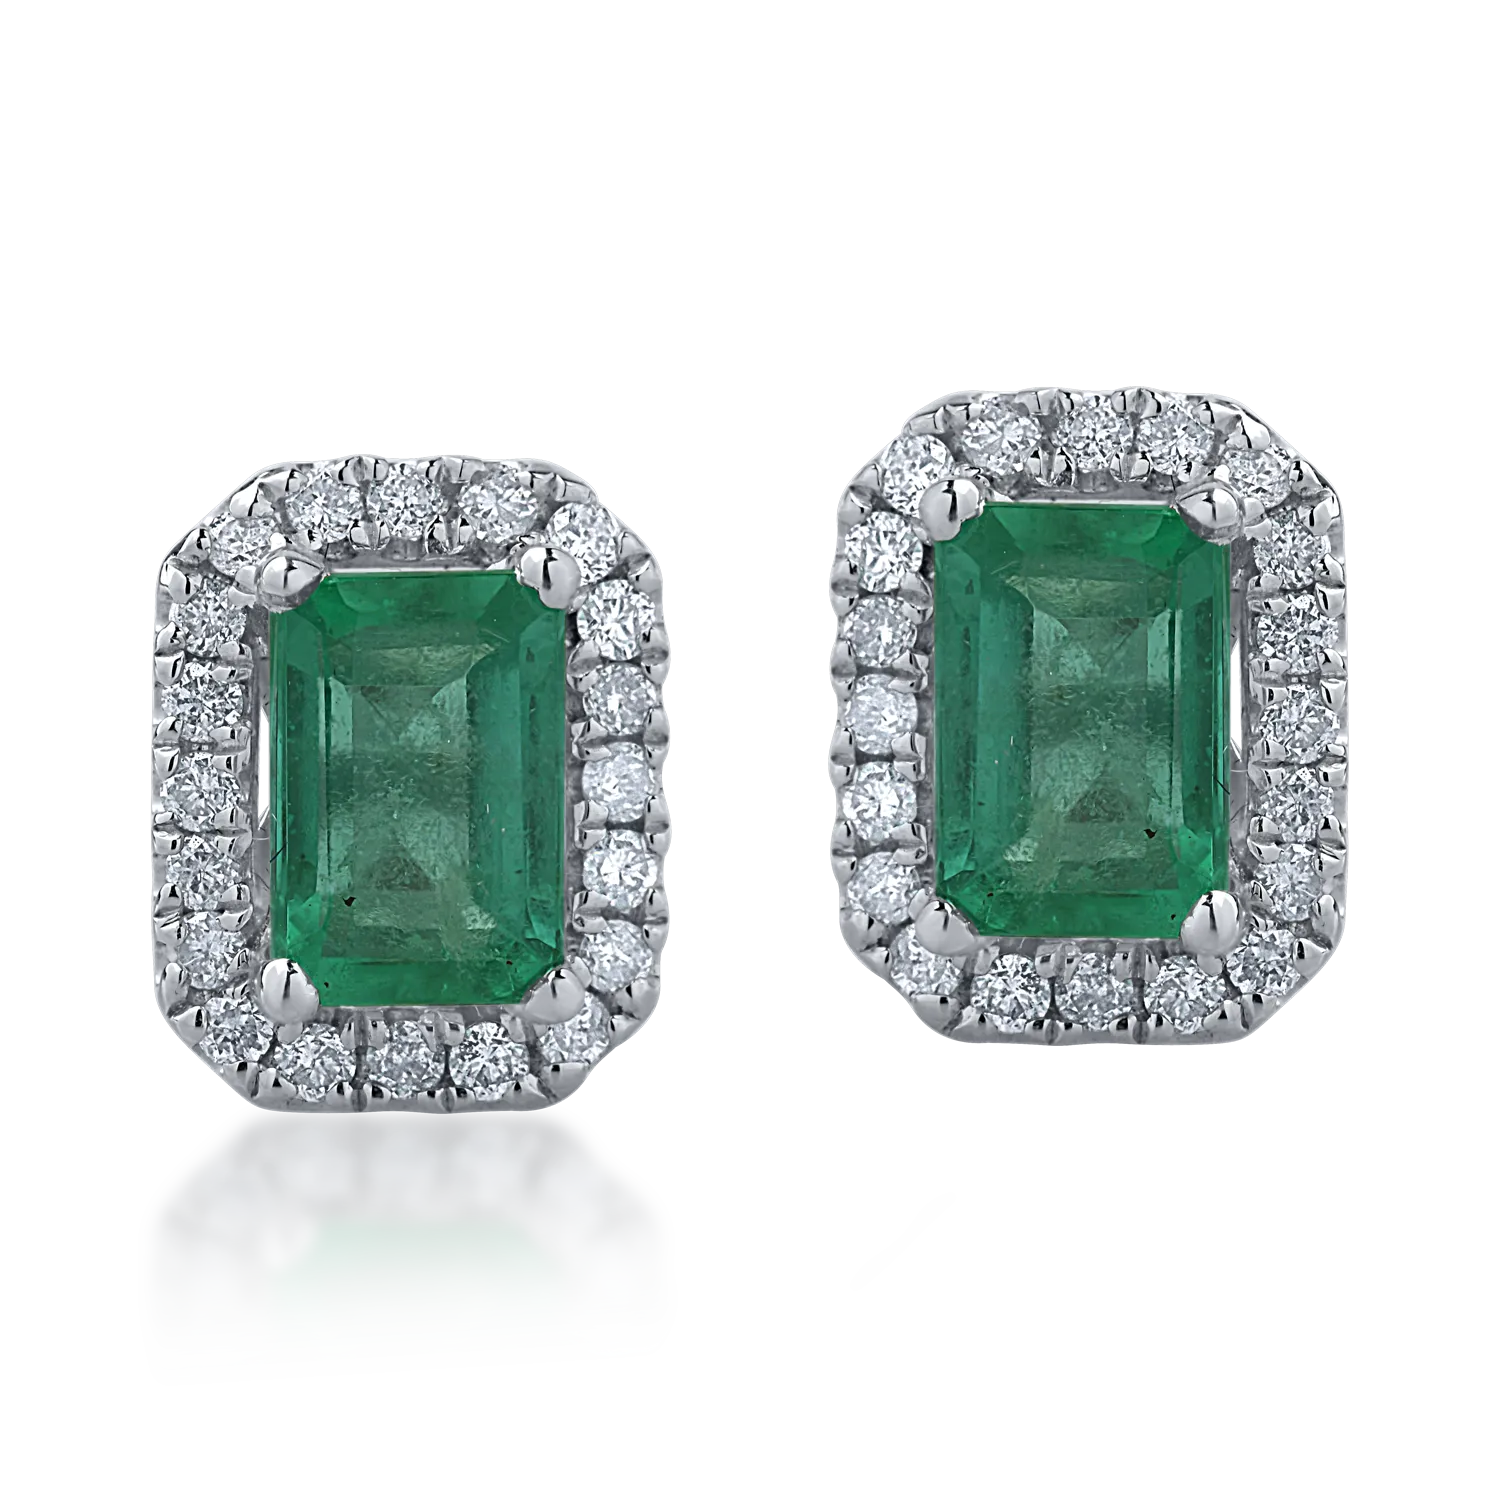 White gold earrings with 1.17ct emeralds and 0.26ct diamonds